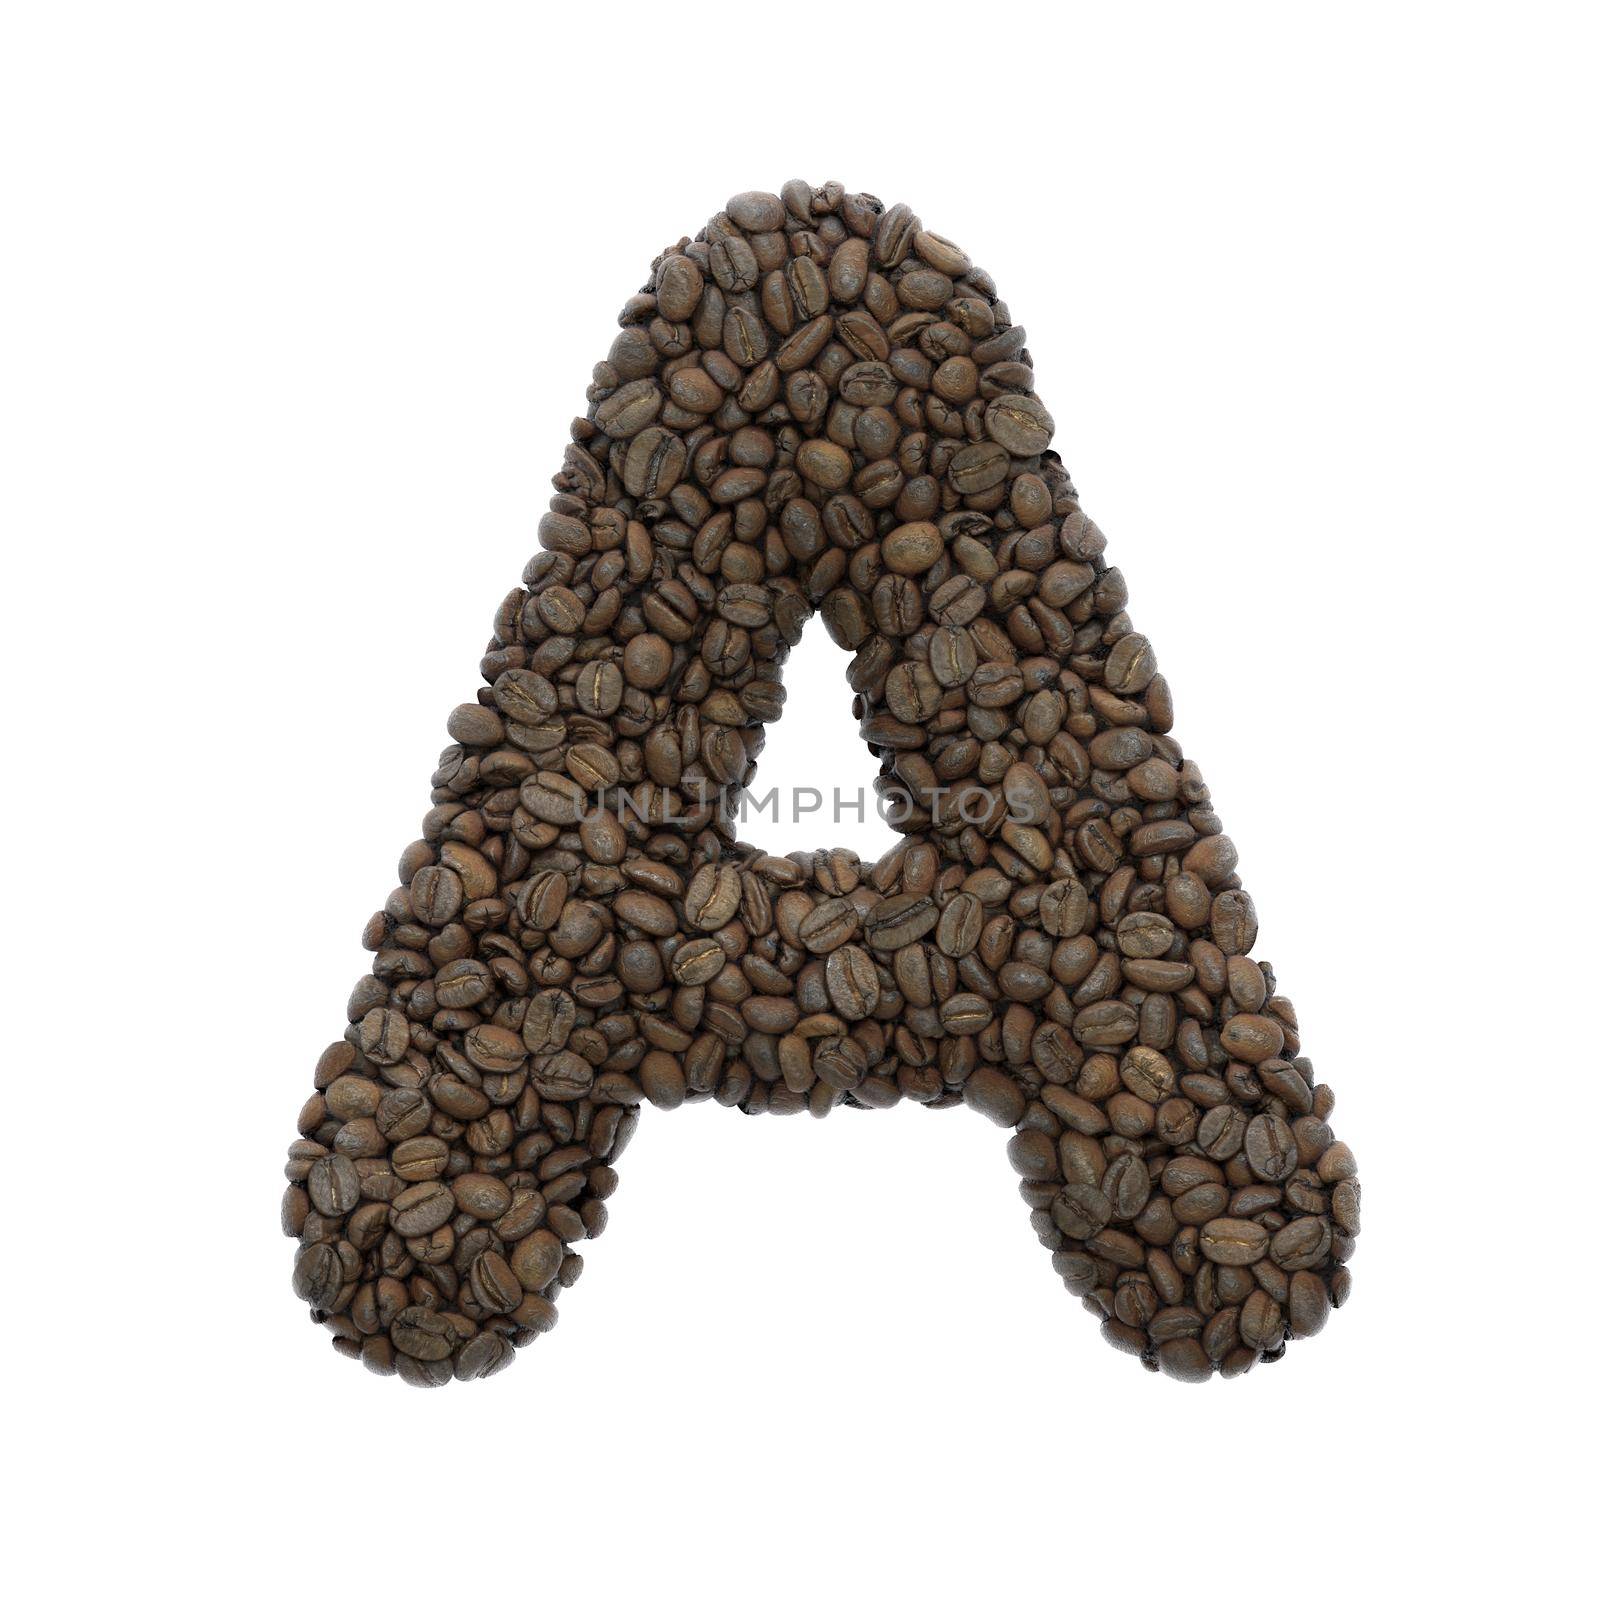 Coffee letter A - Capital 3d roasted beans font isolated on white background. This alphabet is perfect for creative illustrations related but not limited to Coffee, energy, insomnia...